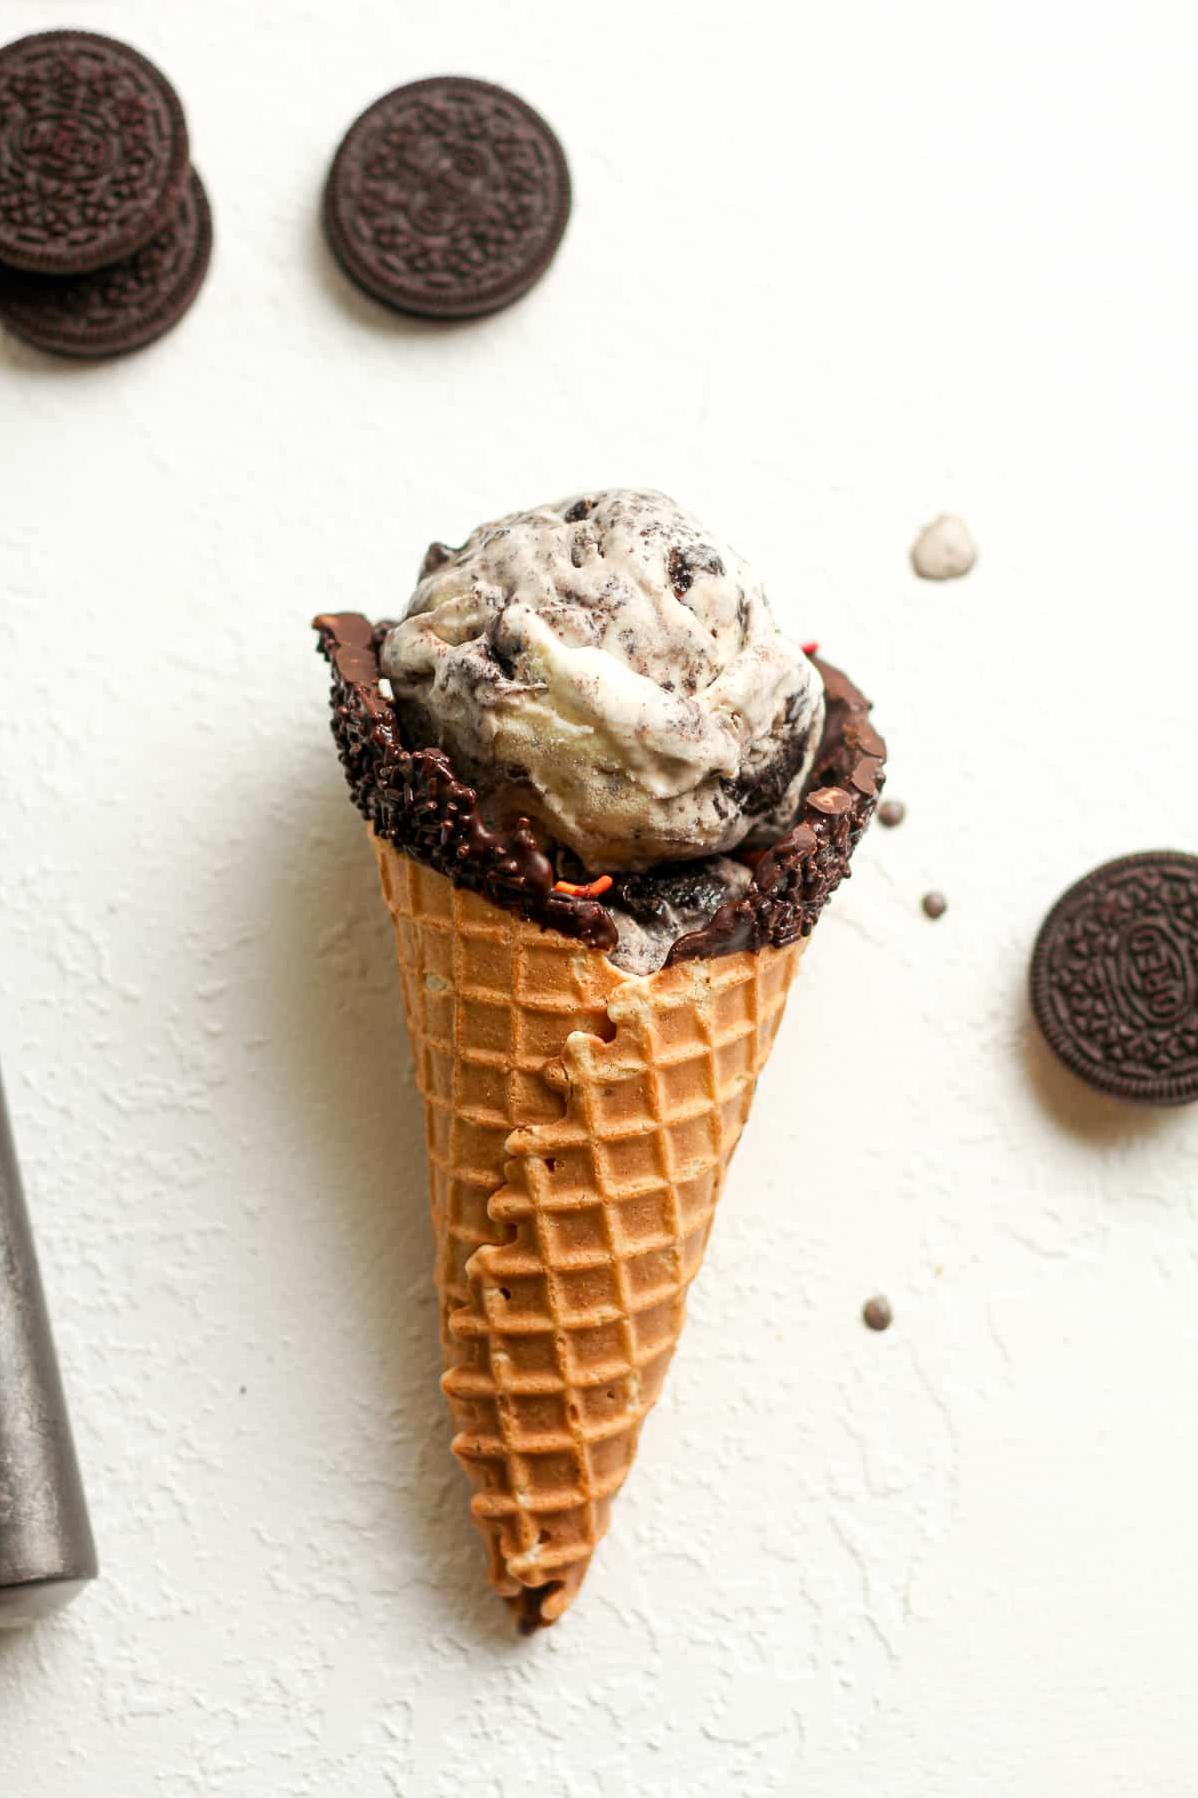  Our Coffee Oreo Cookie Rum Ice Cream is the perfect treat for coffee and ice cream lovers.